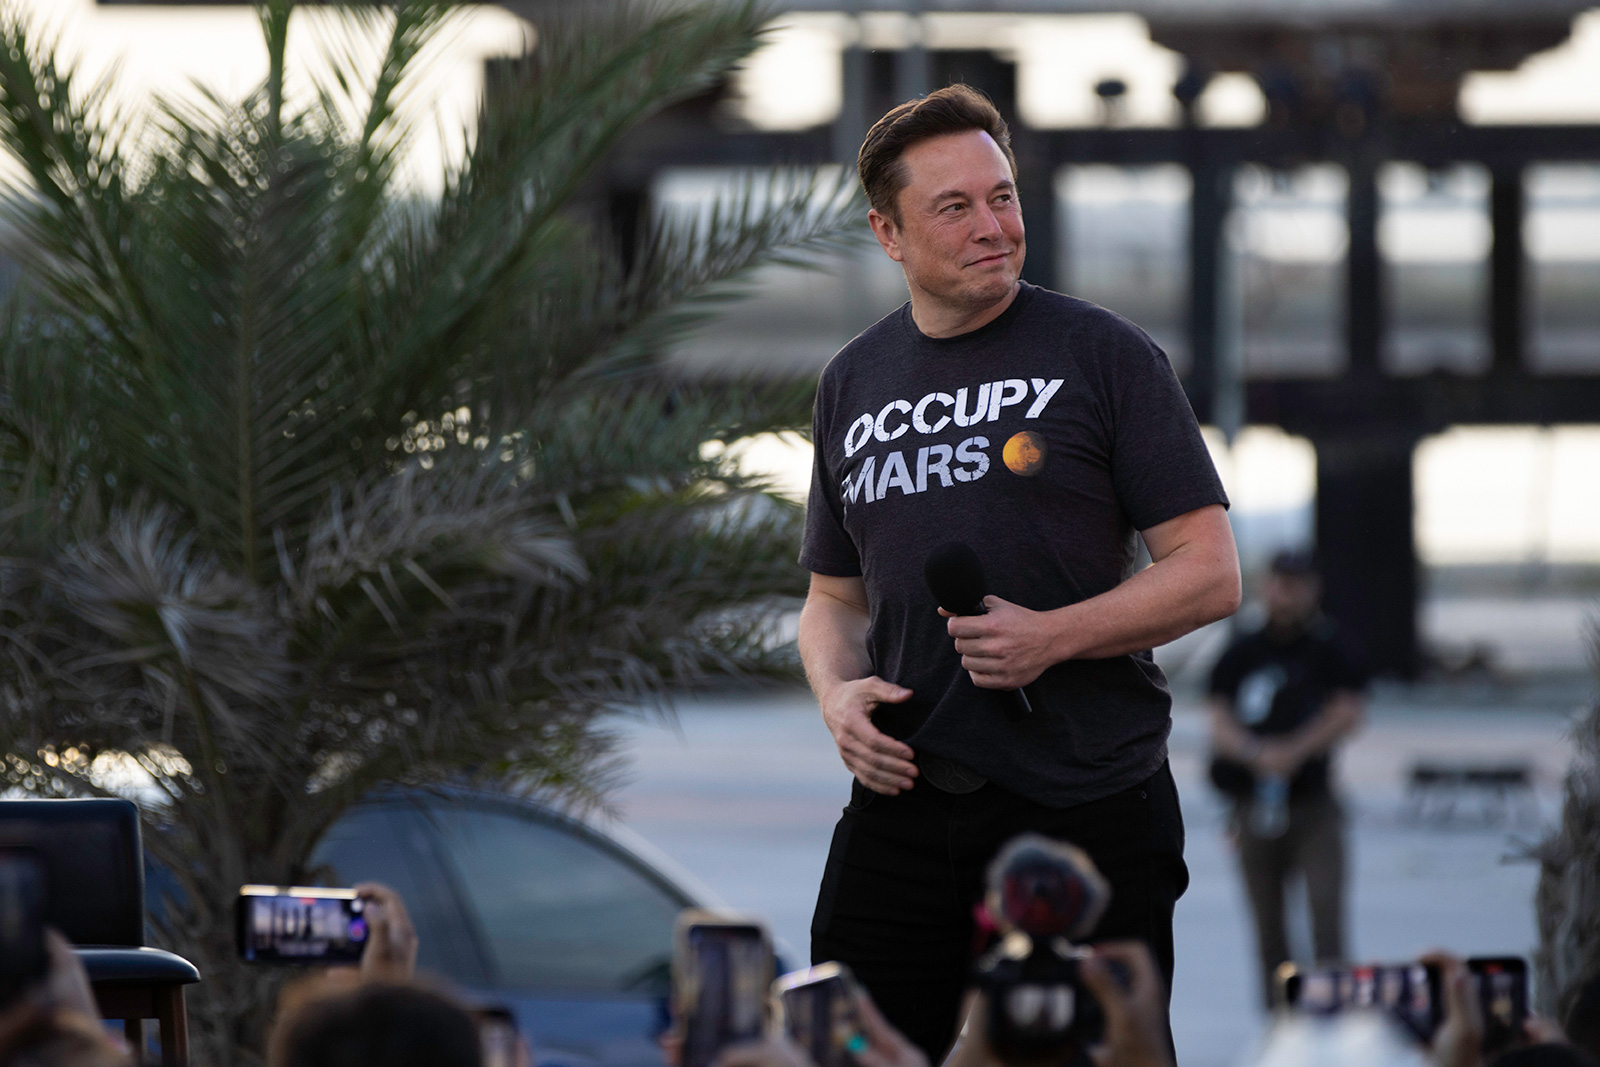 Elon Musk walks on stage during SpaceX event in Boca Chica Beach, Texas on August 25, 2022.